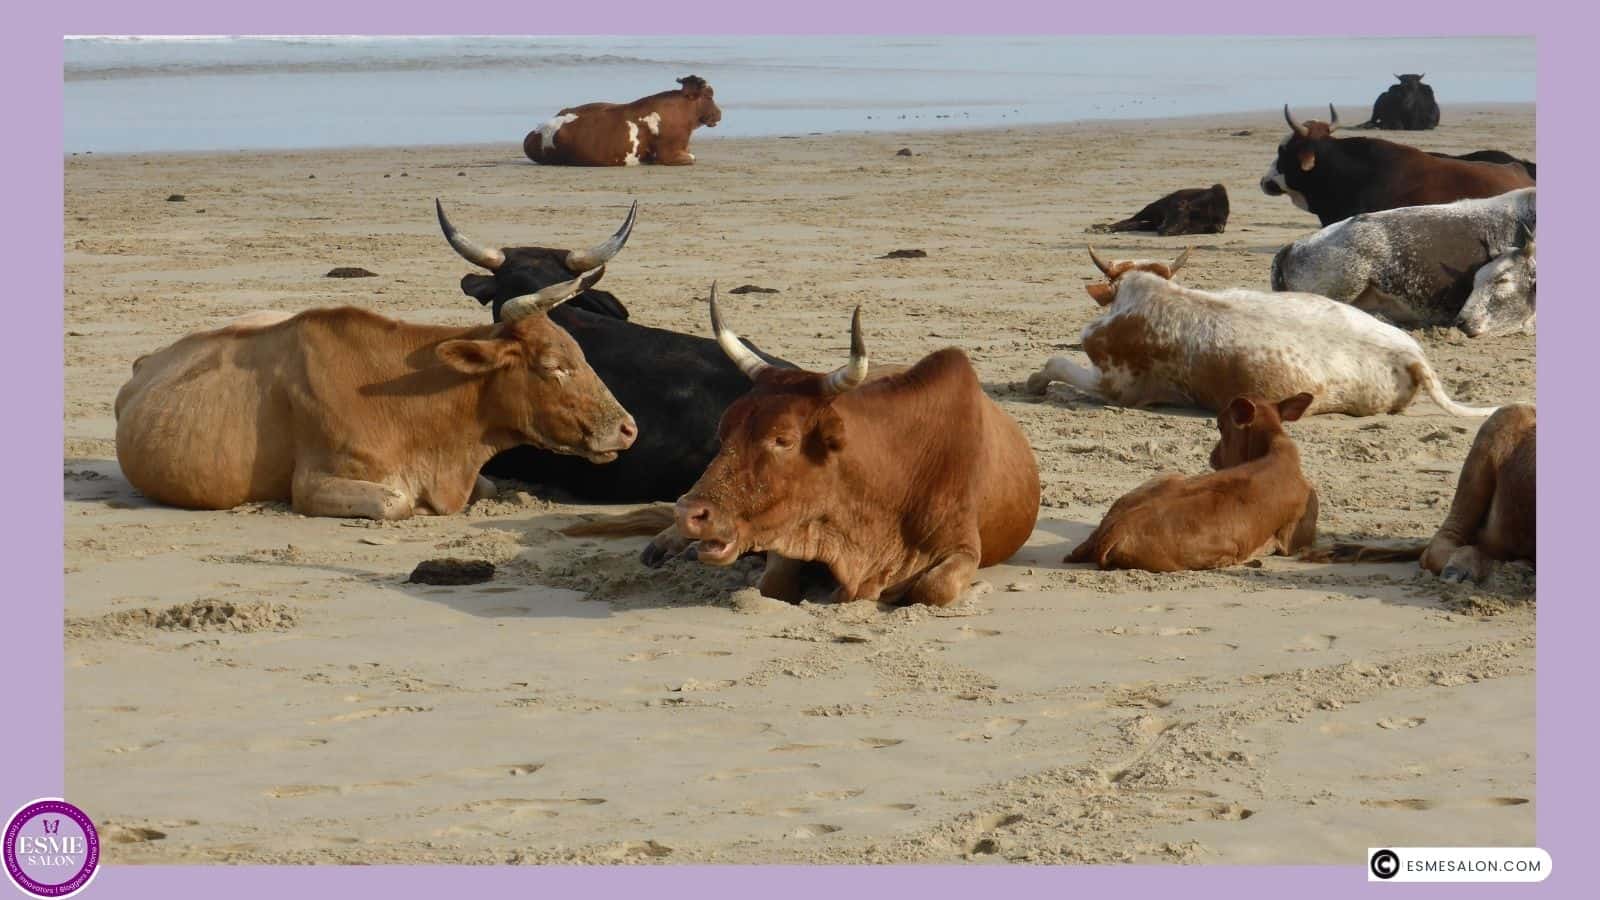 an image of Xhosa cattle on the beach